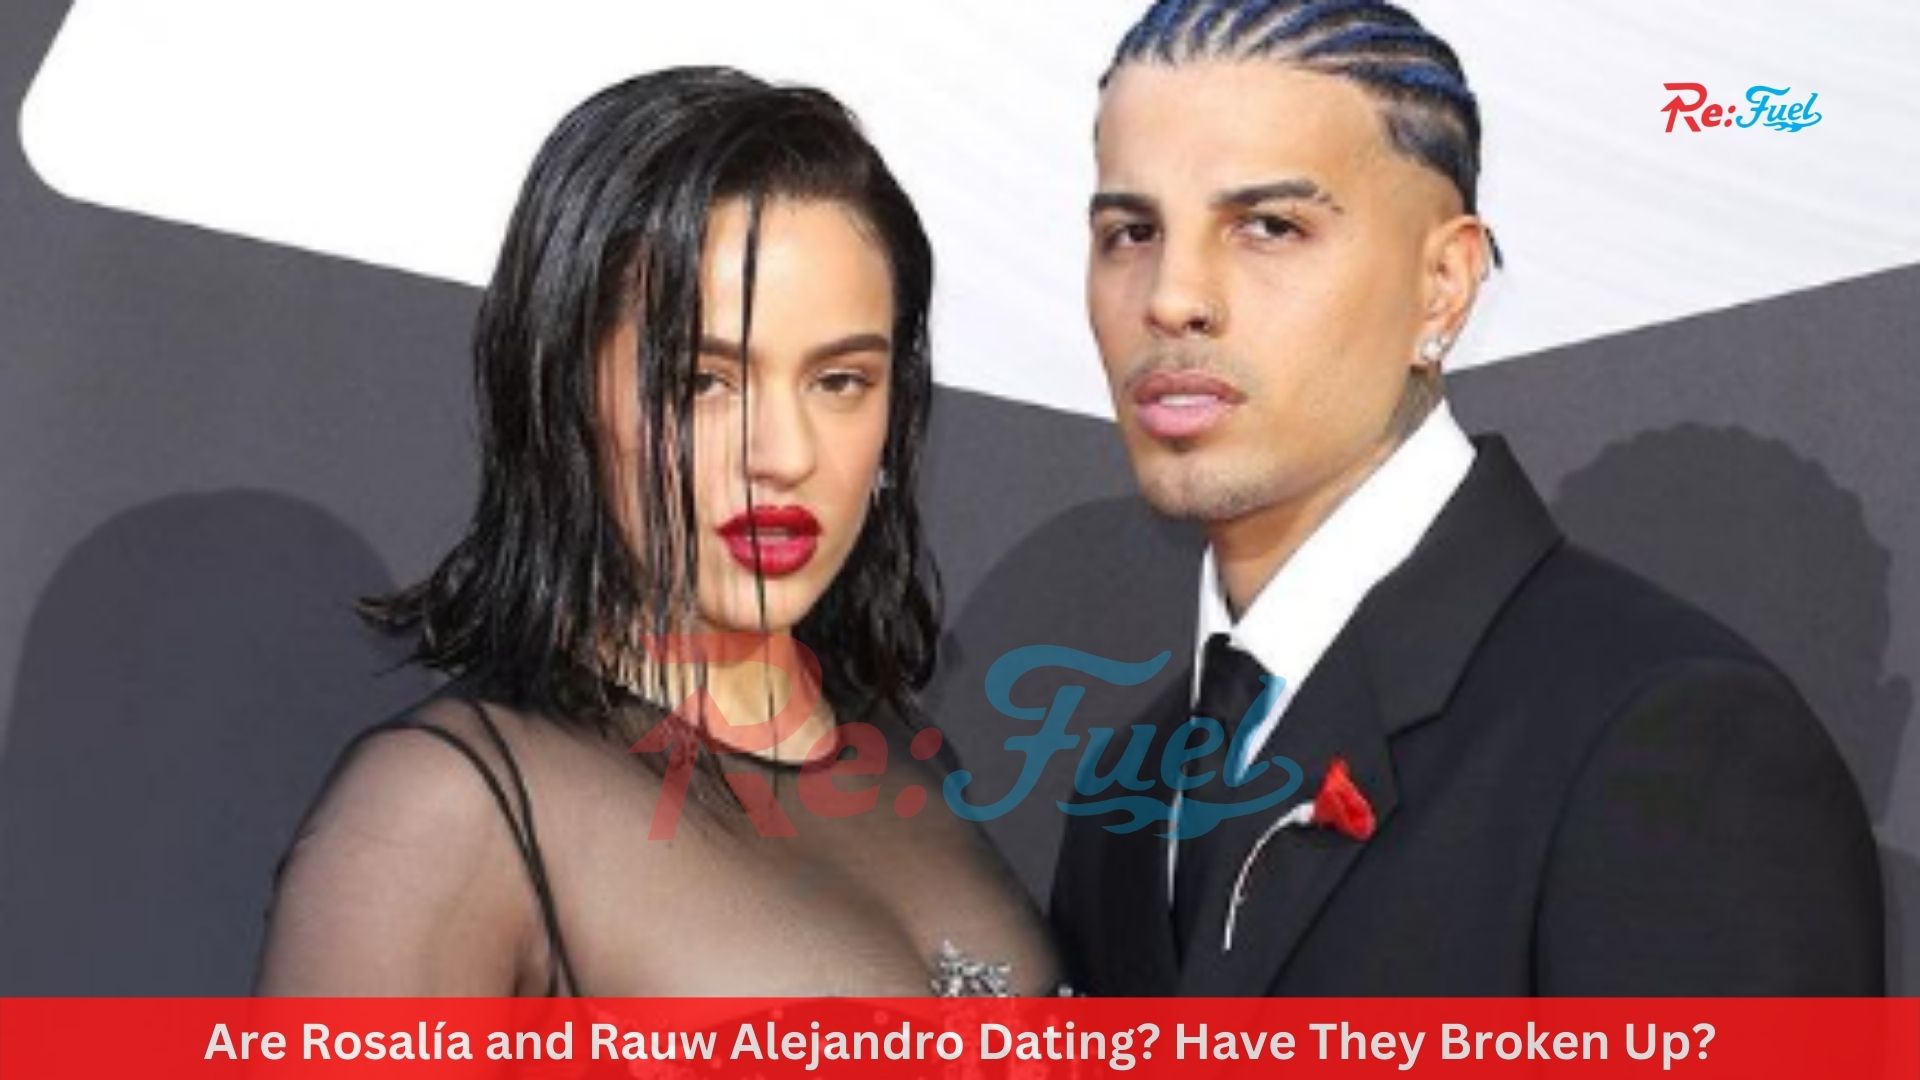 Are Rosalía and Rauw Alejandro Dating? Have They Broken Up?